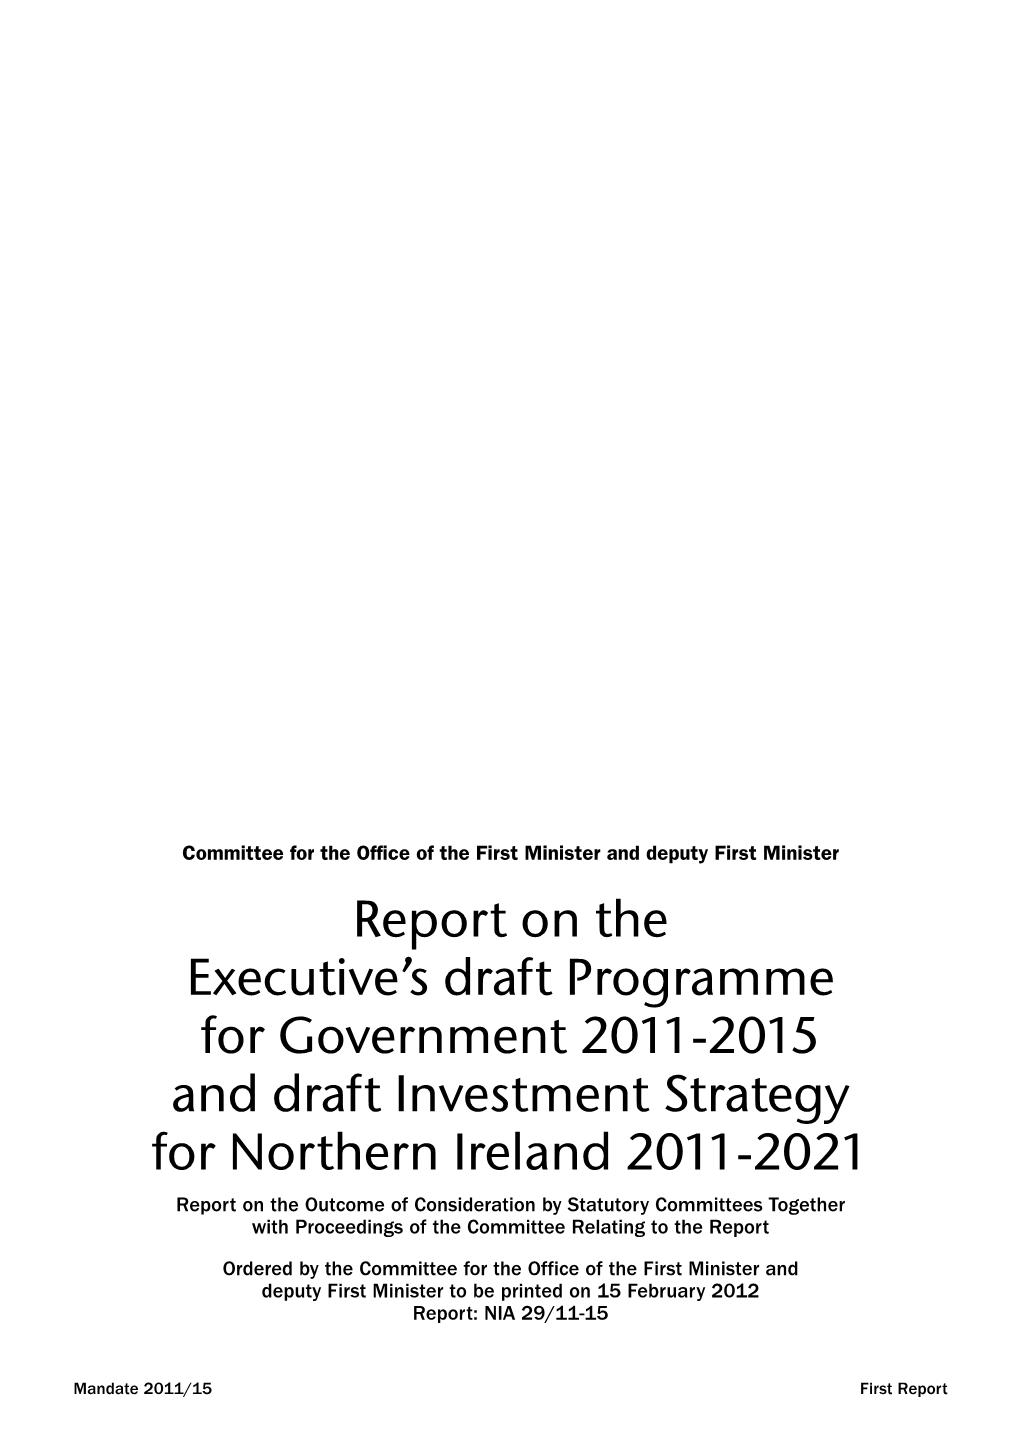 Report on the Executive's Draft Programme for Government 2011